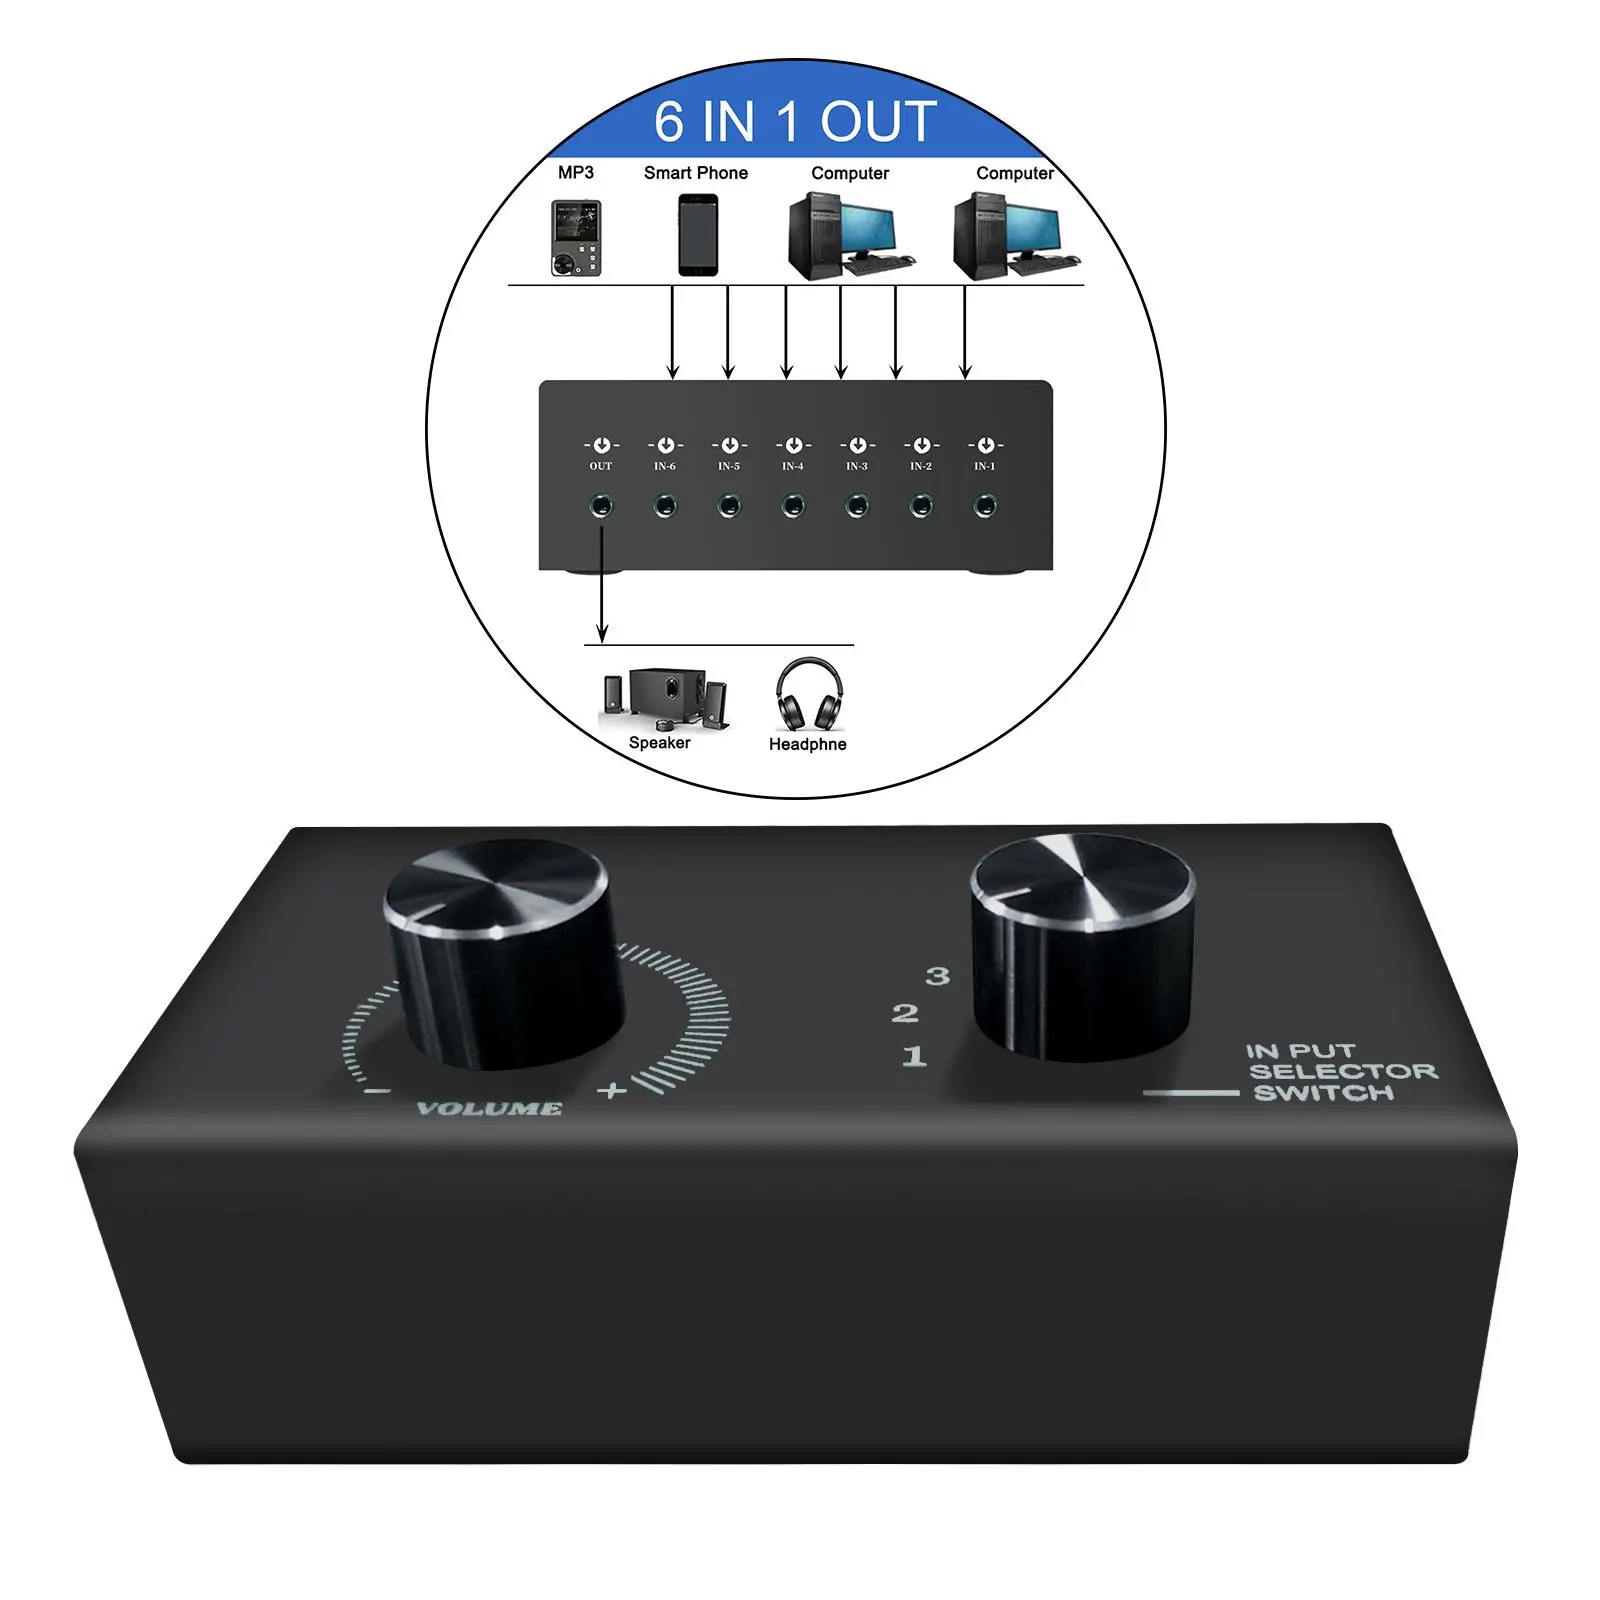 Audio Switch 6 in 1 Out Stereo AUX Audio Selector Lightweight Plug and Play Audio Switcher Box Portable for Headphone PC Phone